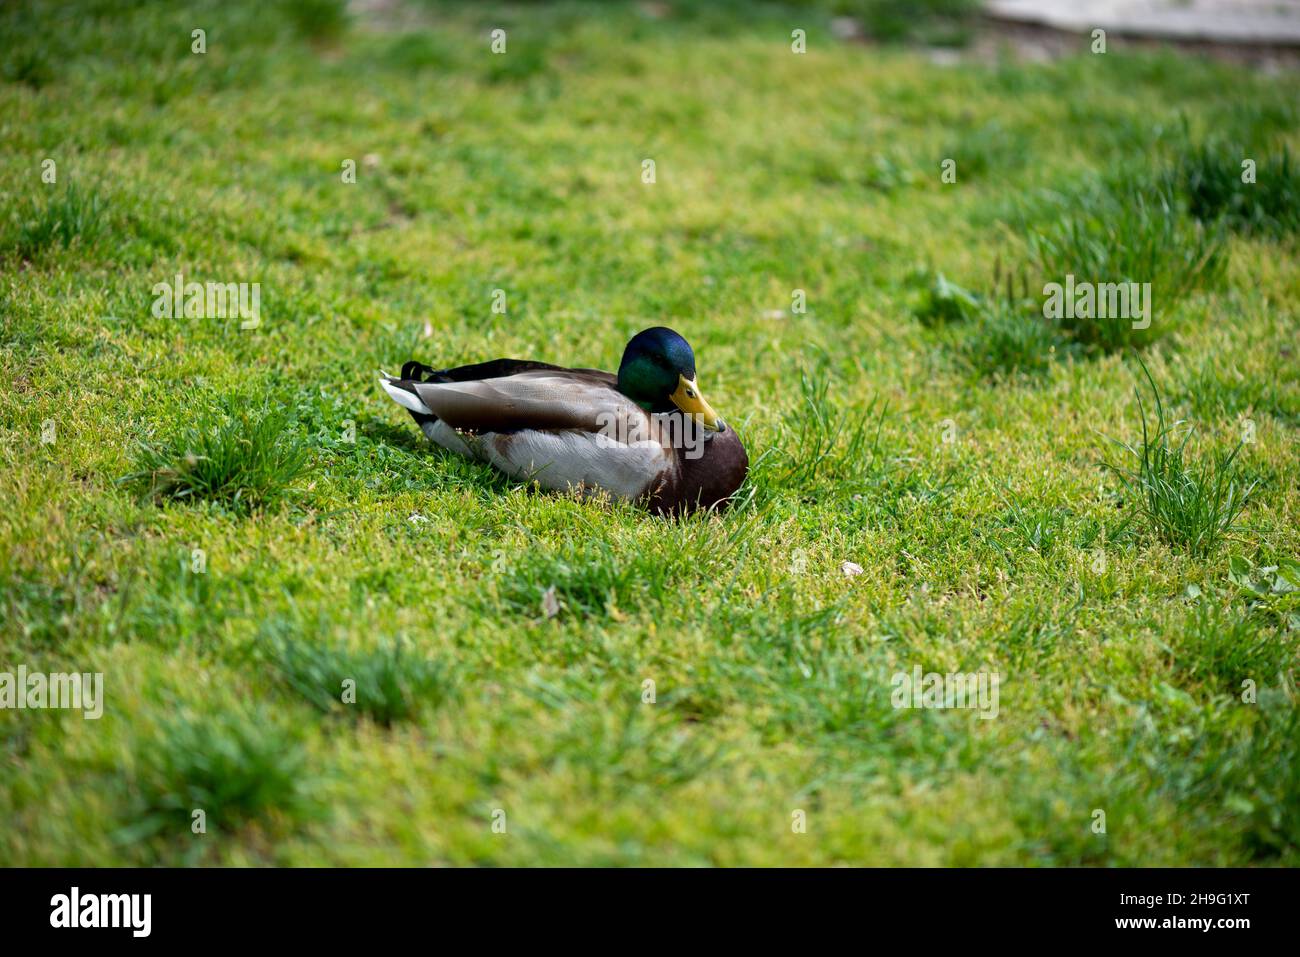 View of a duck crouching in the grass Stock Photo